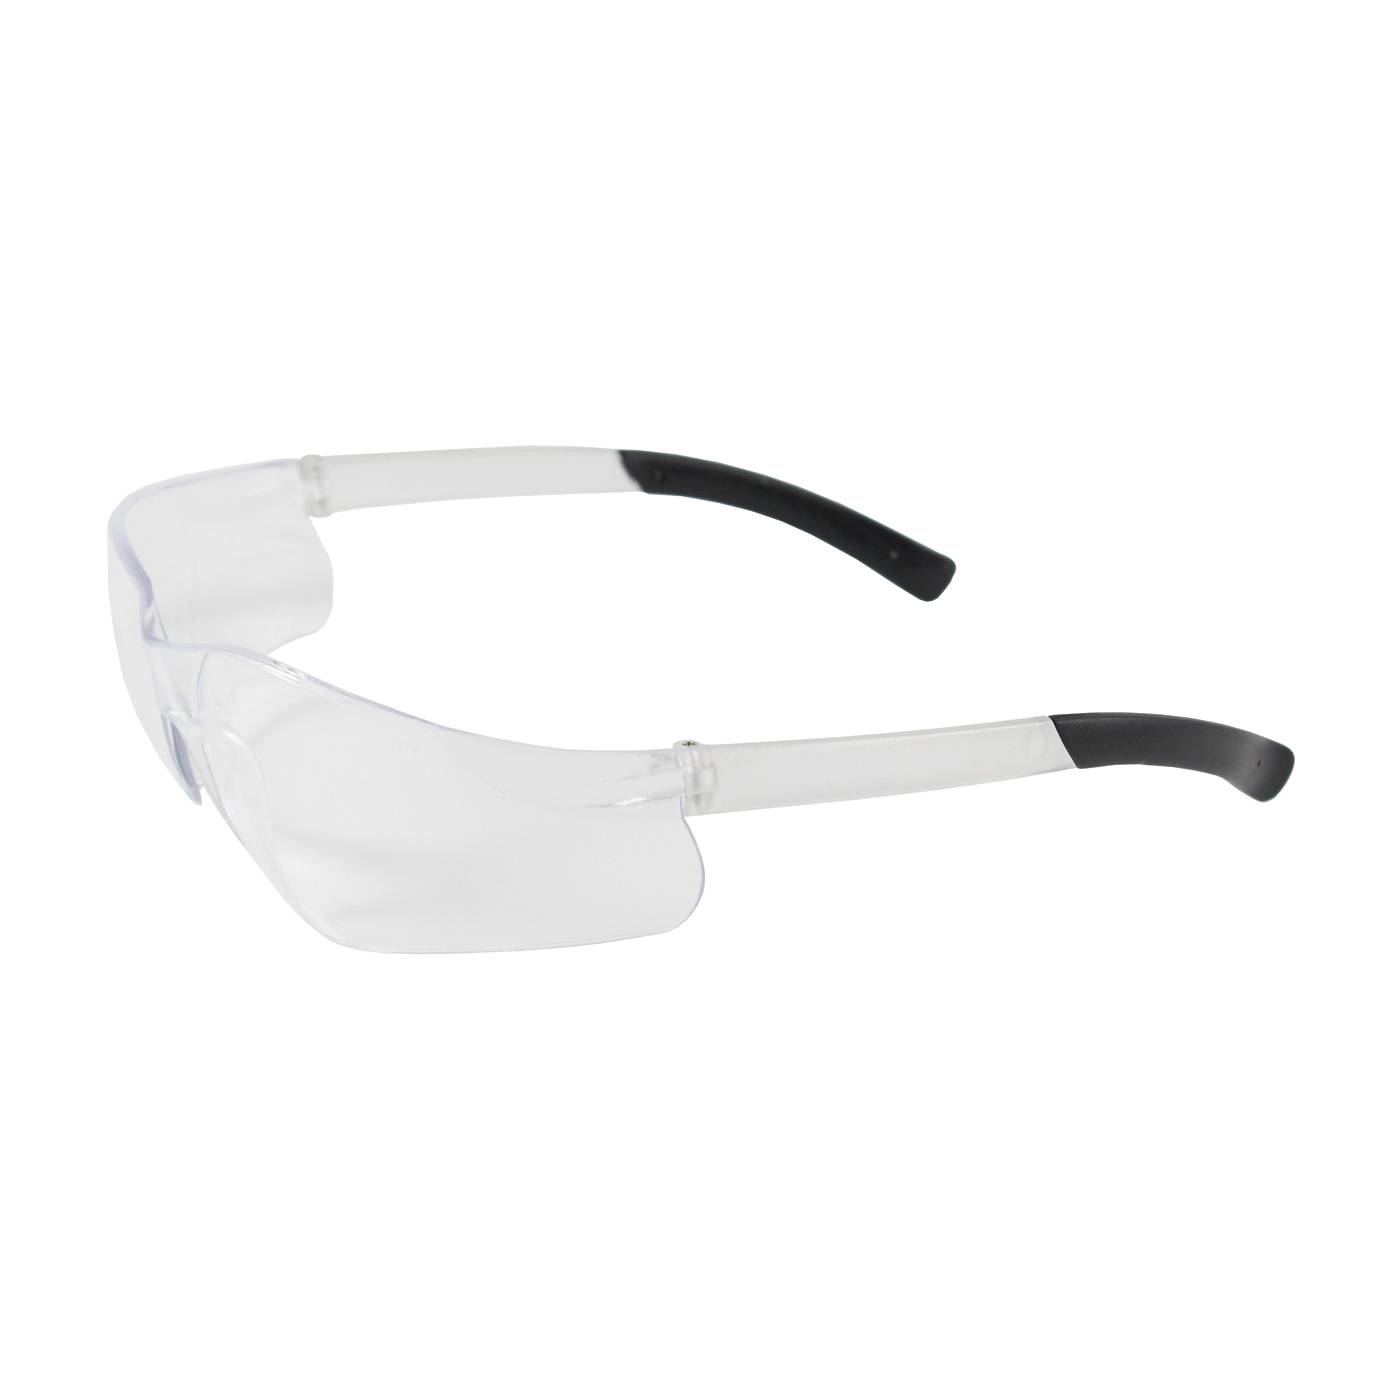 Bouton® 250-06-0020 Zenon Z13™ Lightweight Protective Glasses, Anti-Fog/Anti-Scratch, Clear Lens (Discontinued by Manufacturer)